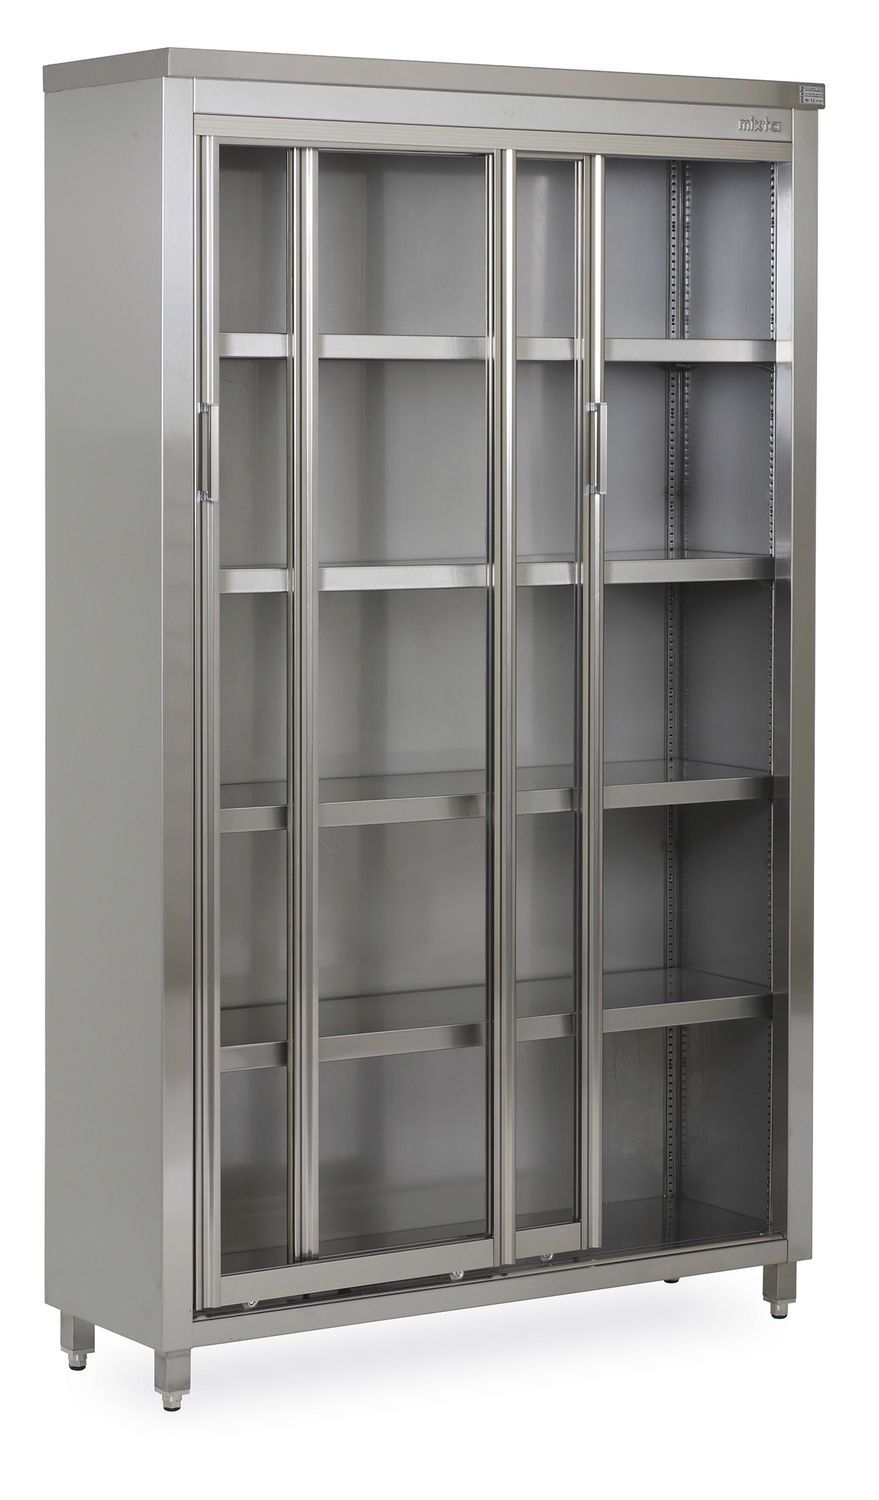 Medical cabinet / operating room / stainless steel MSAD 2008 MIXTA STAINLESS STEEL HOSPITAL EQUIPMENTS